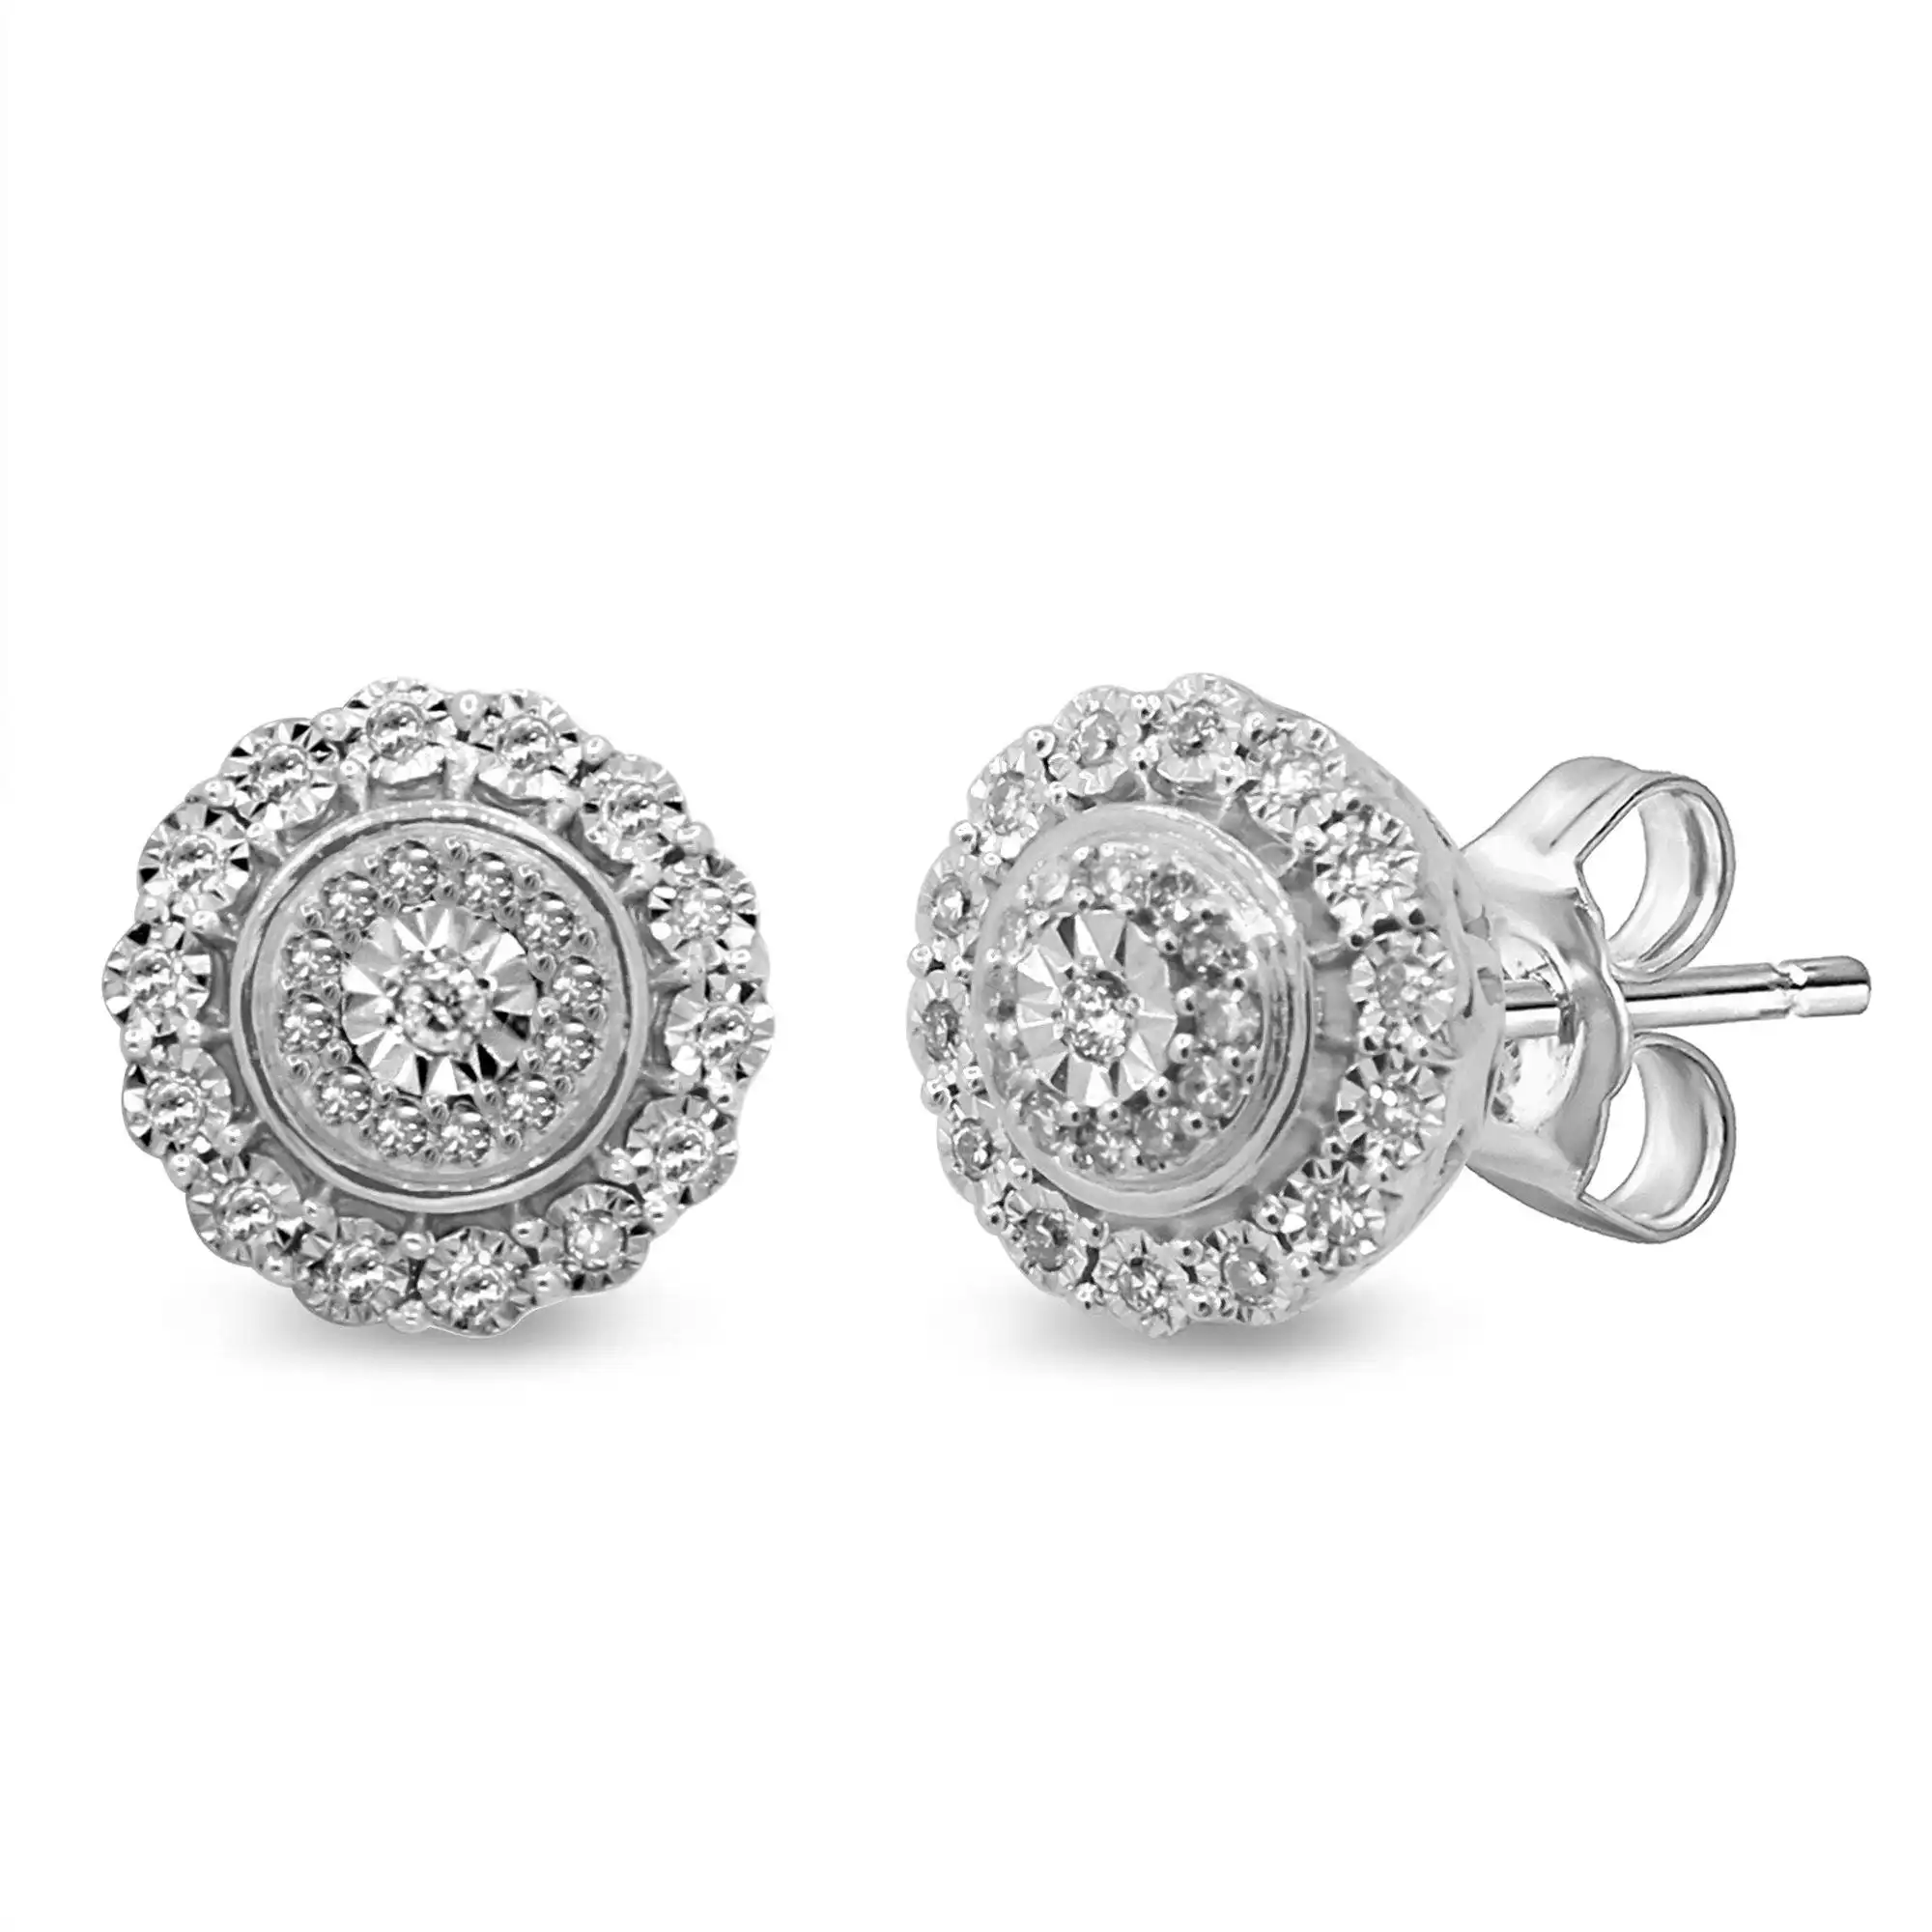 Brilliant Miracle Double Halo Stud Earrings with 1/5ct of Diamonds in 9ct White Gold